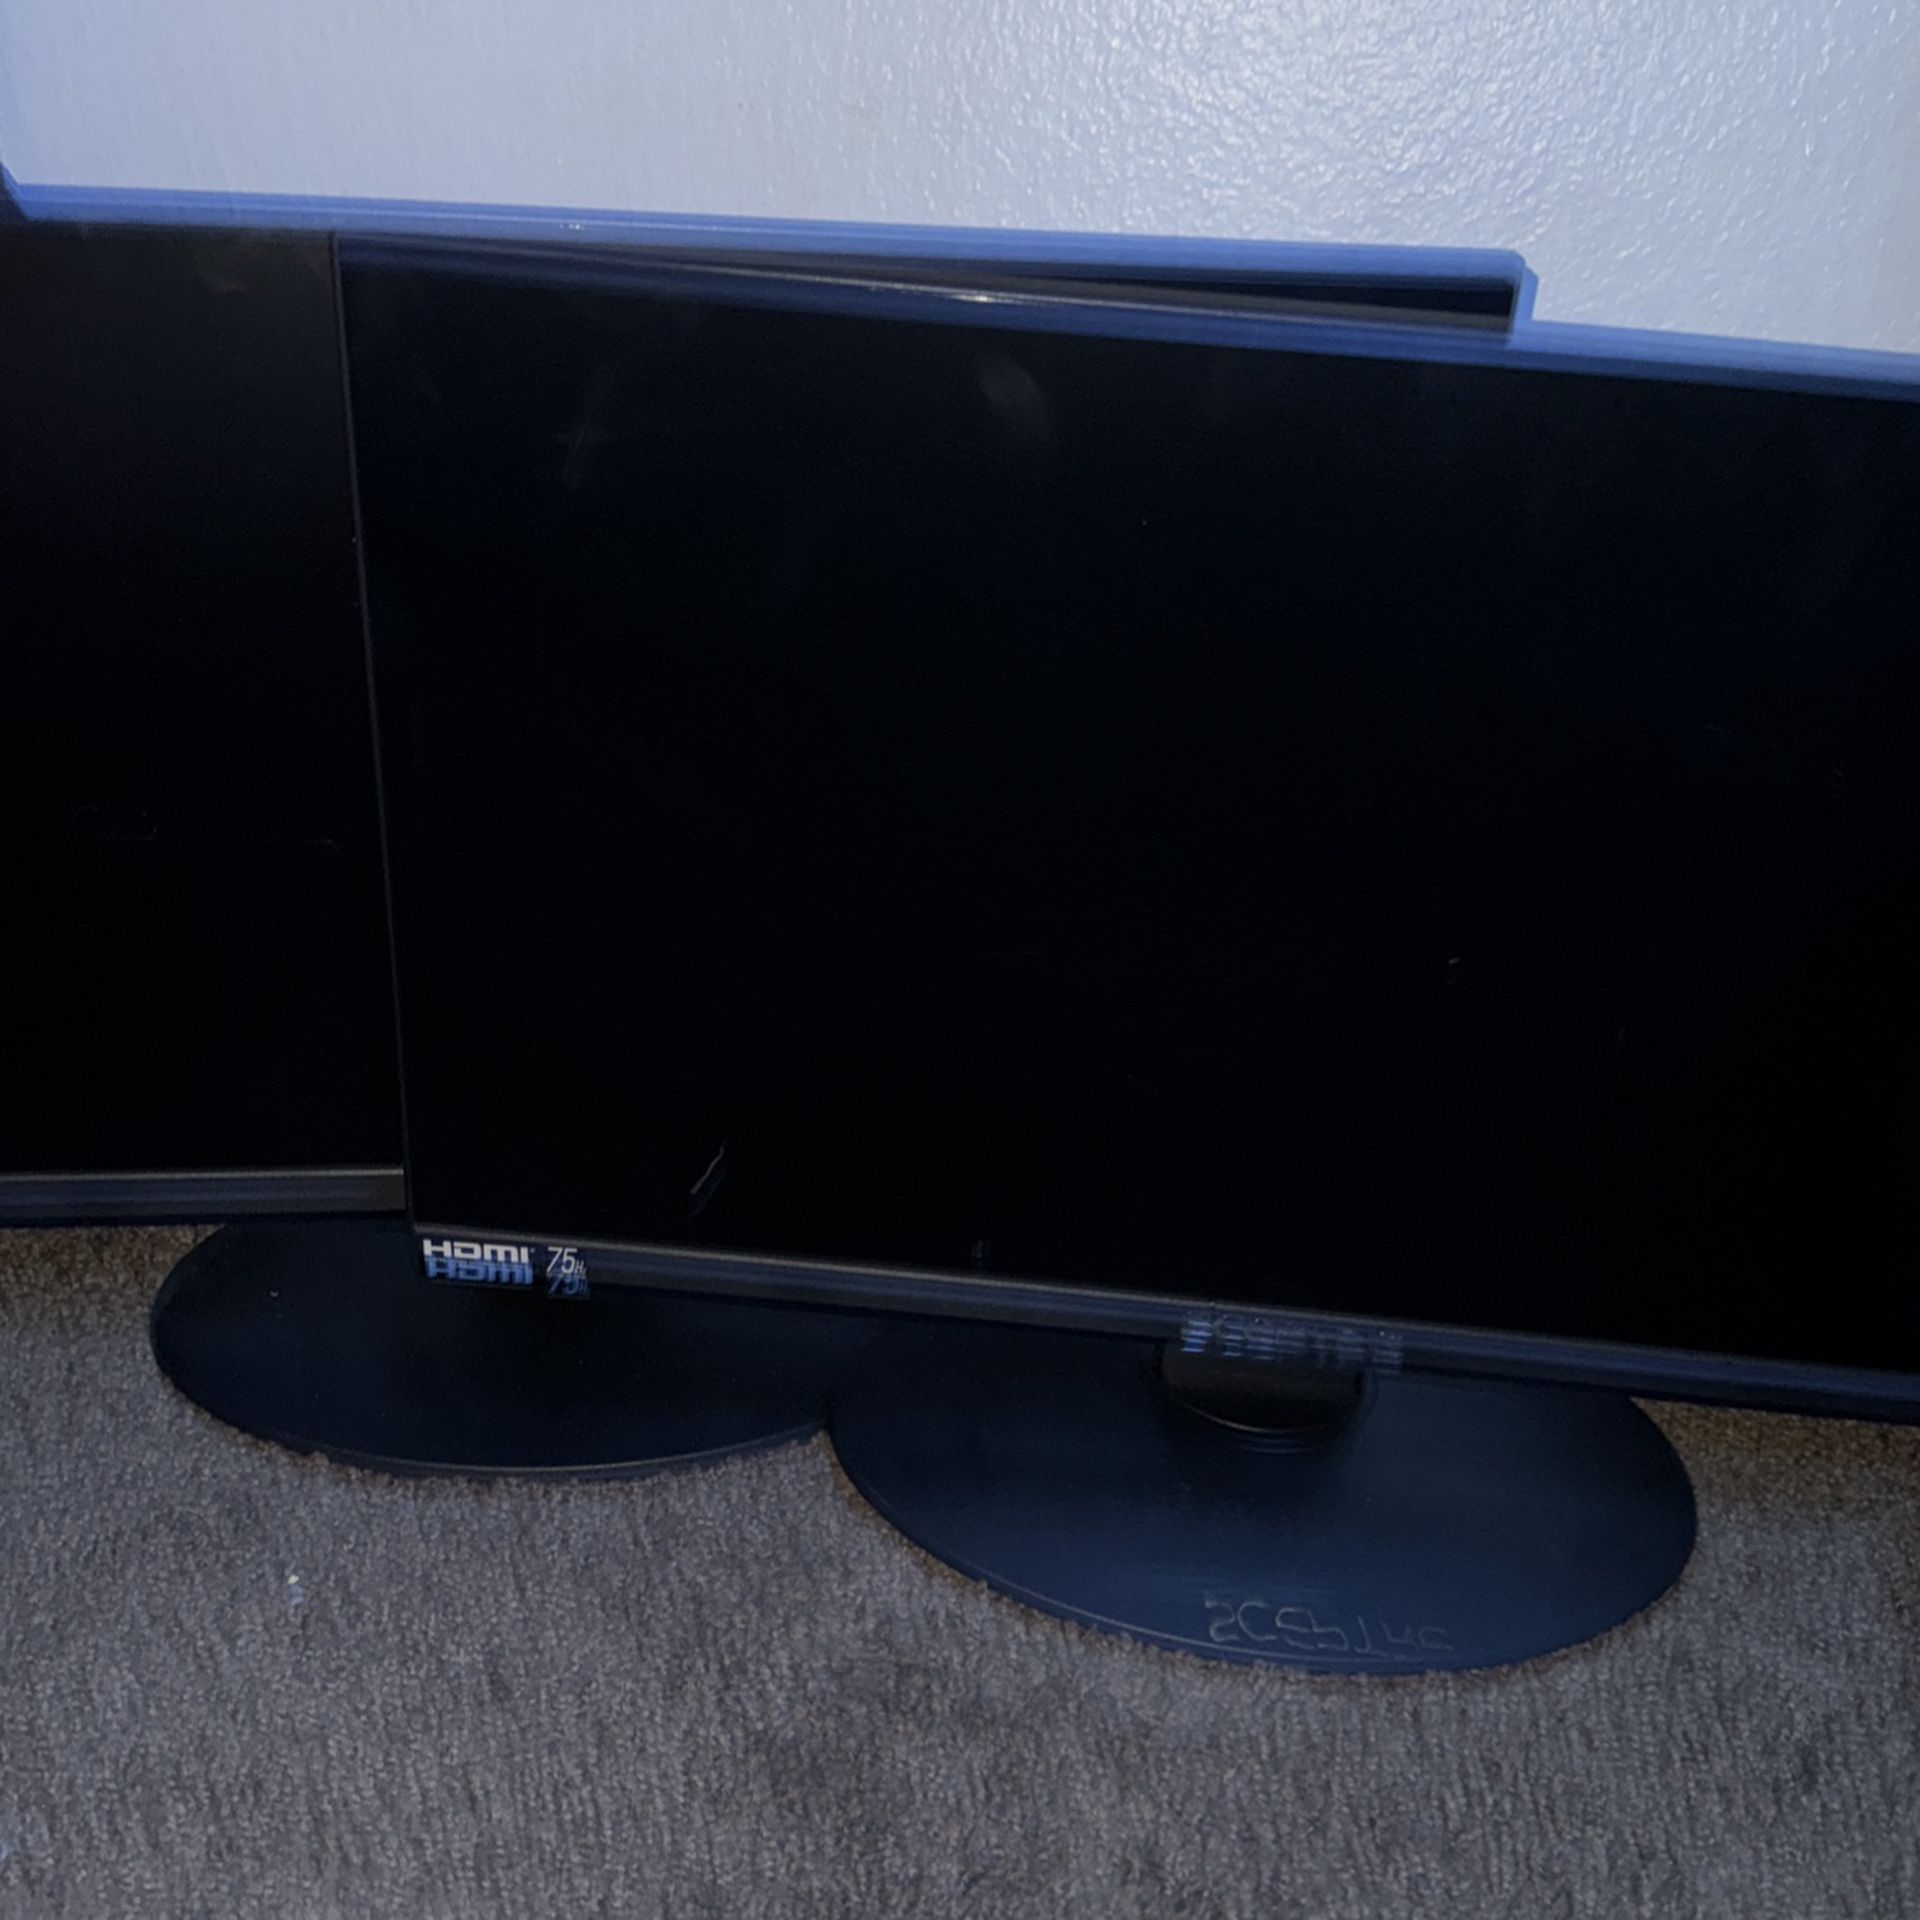 75HZ Monitor 15 Or 18 Inch 